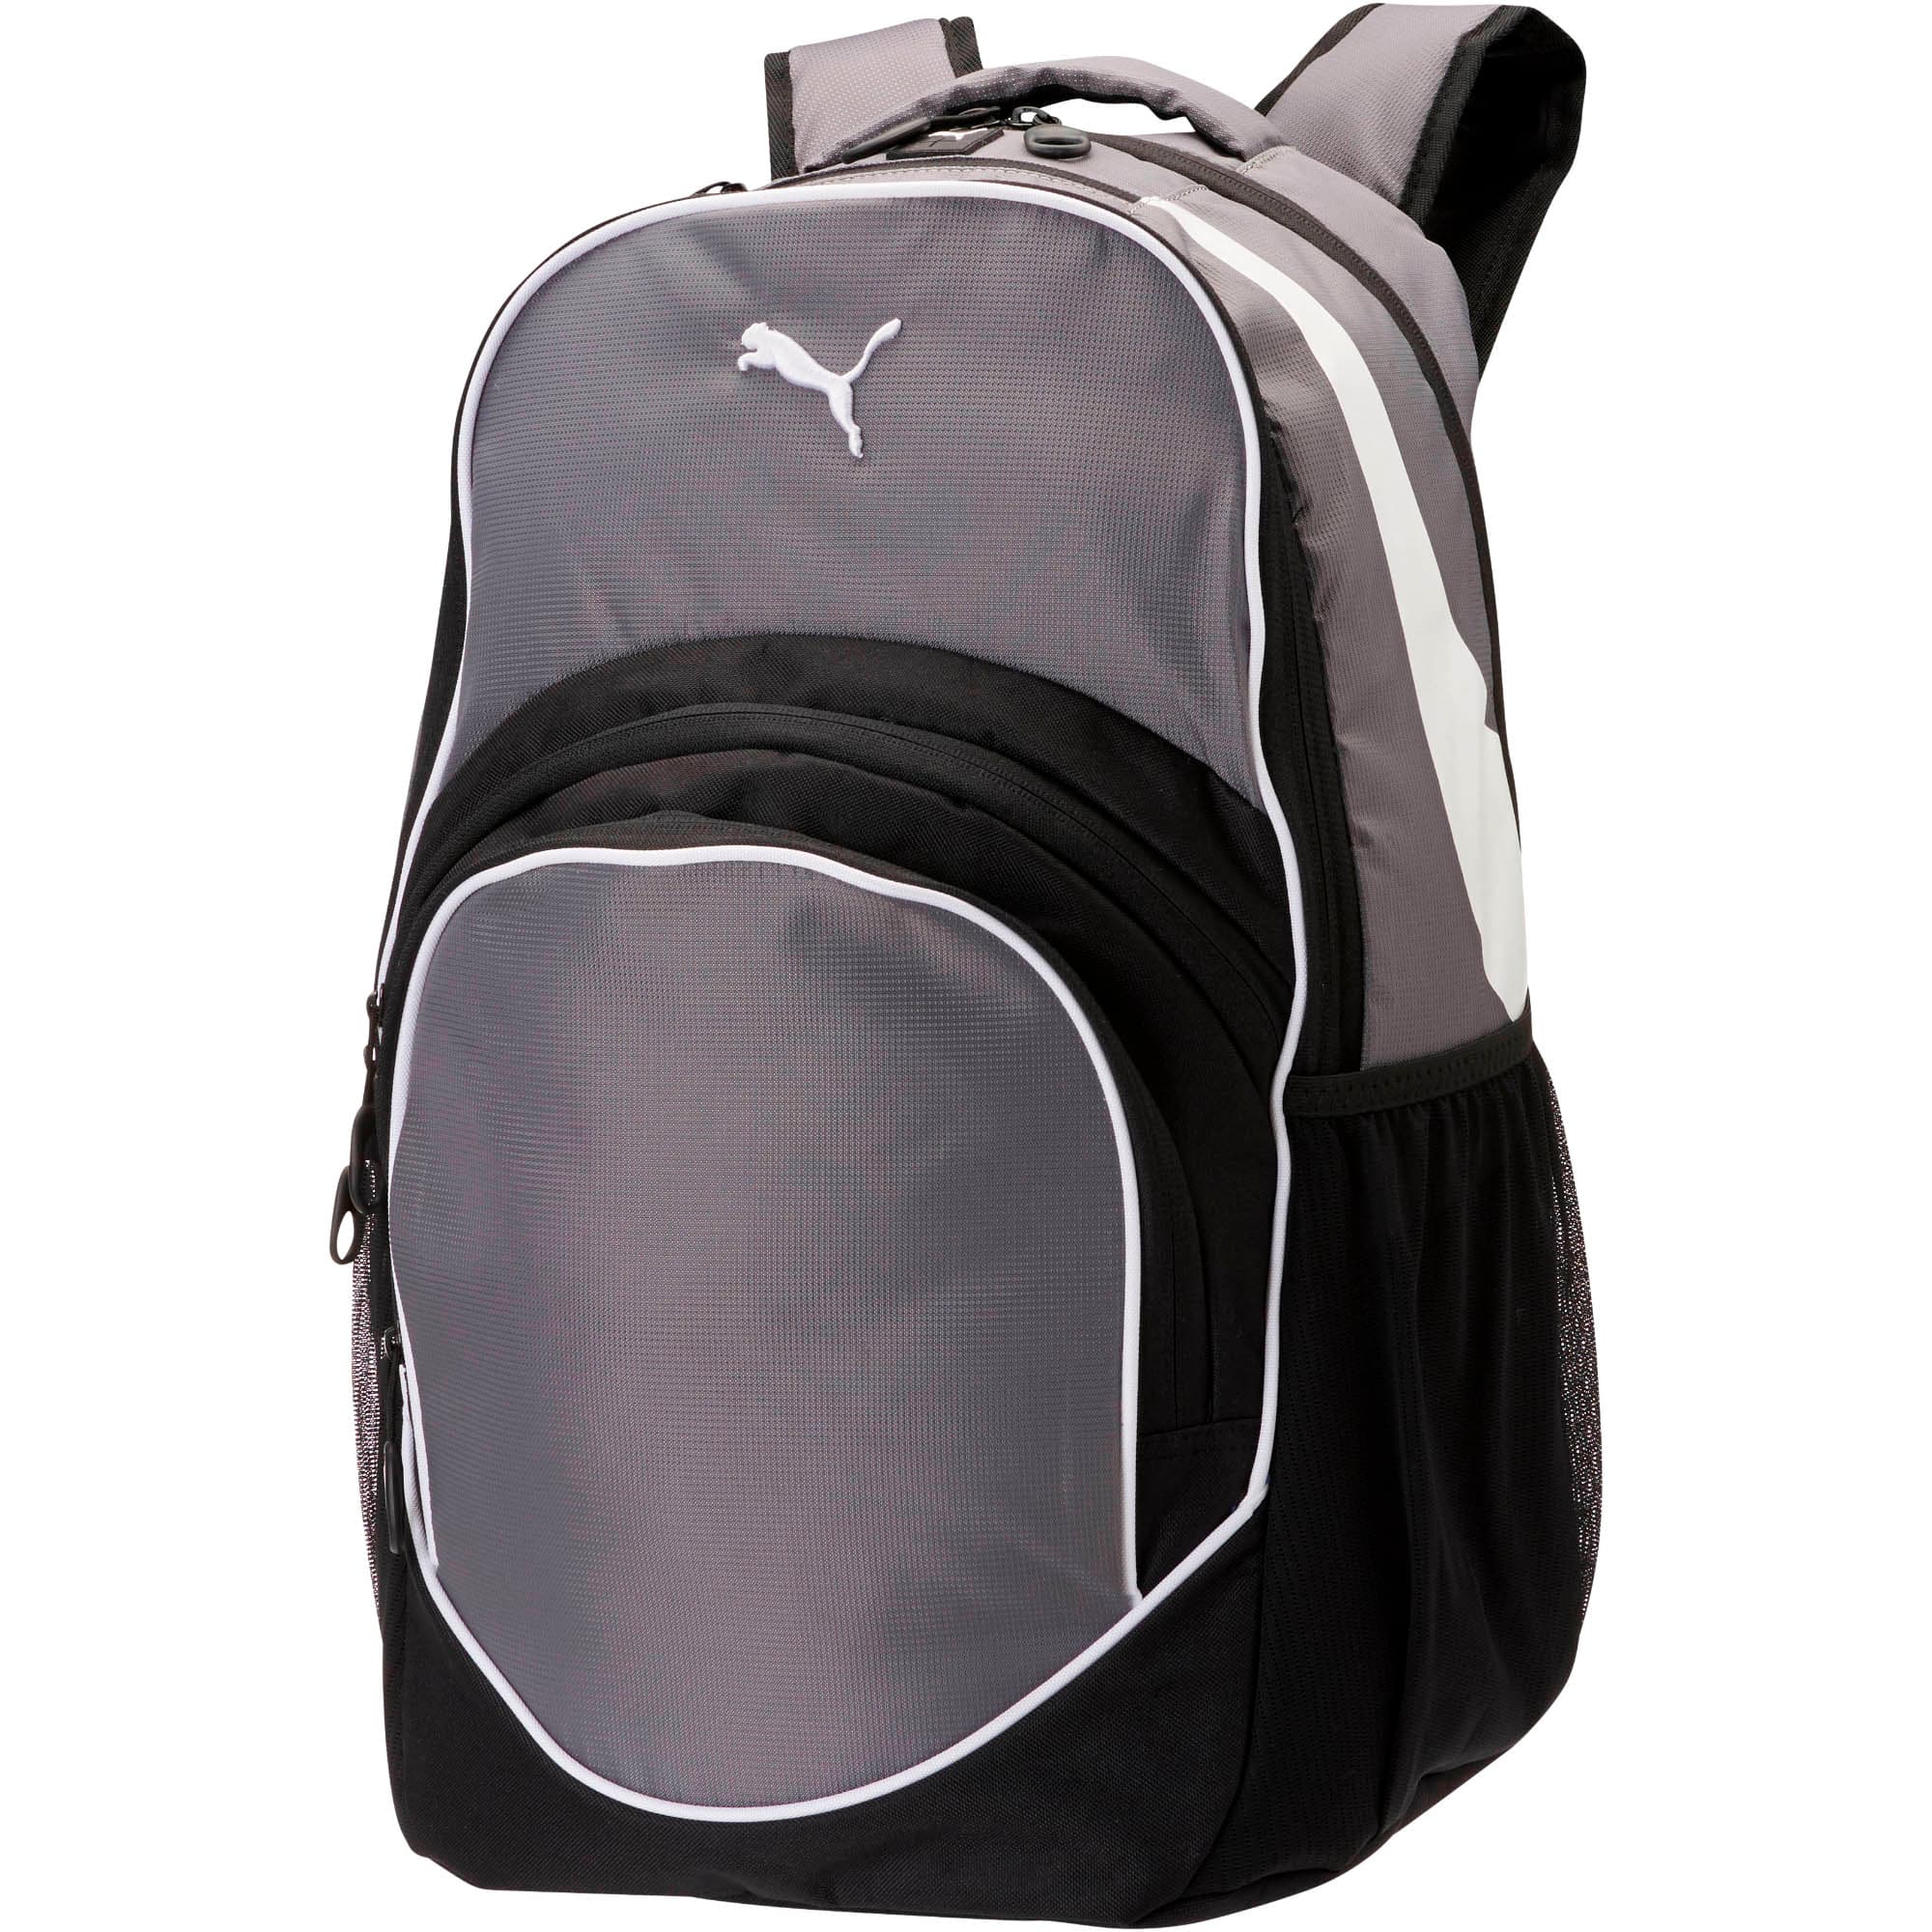 puma formation ball backpack